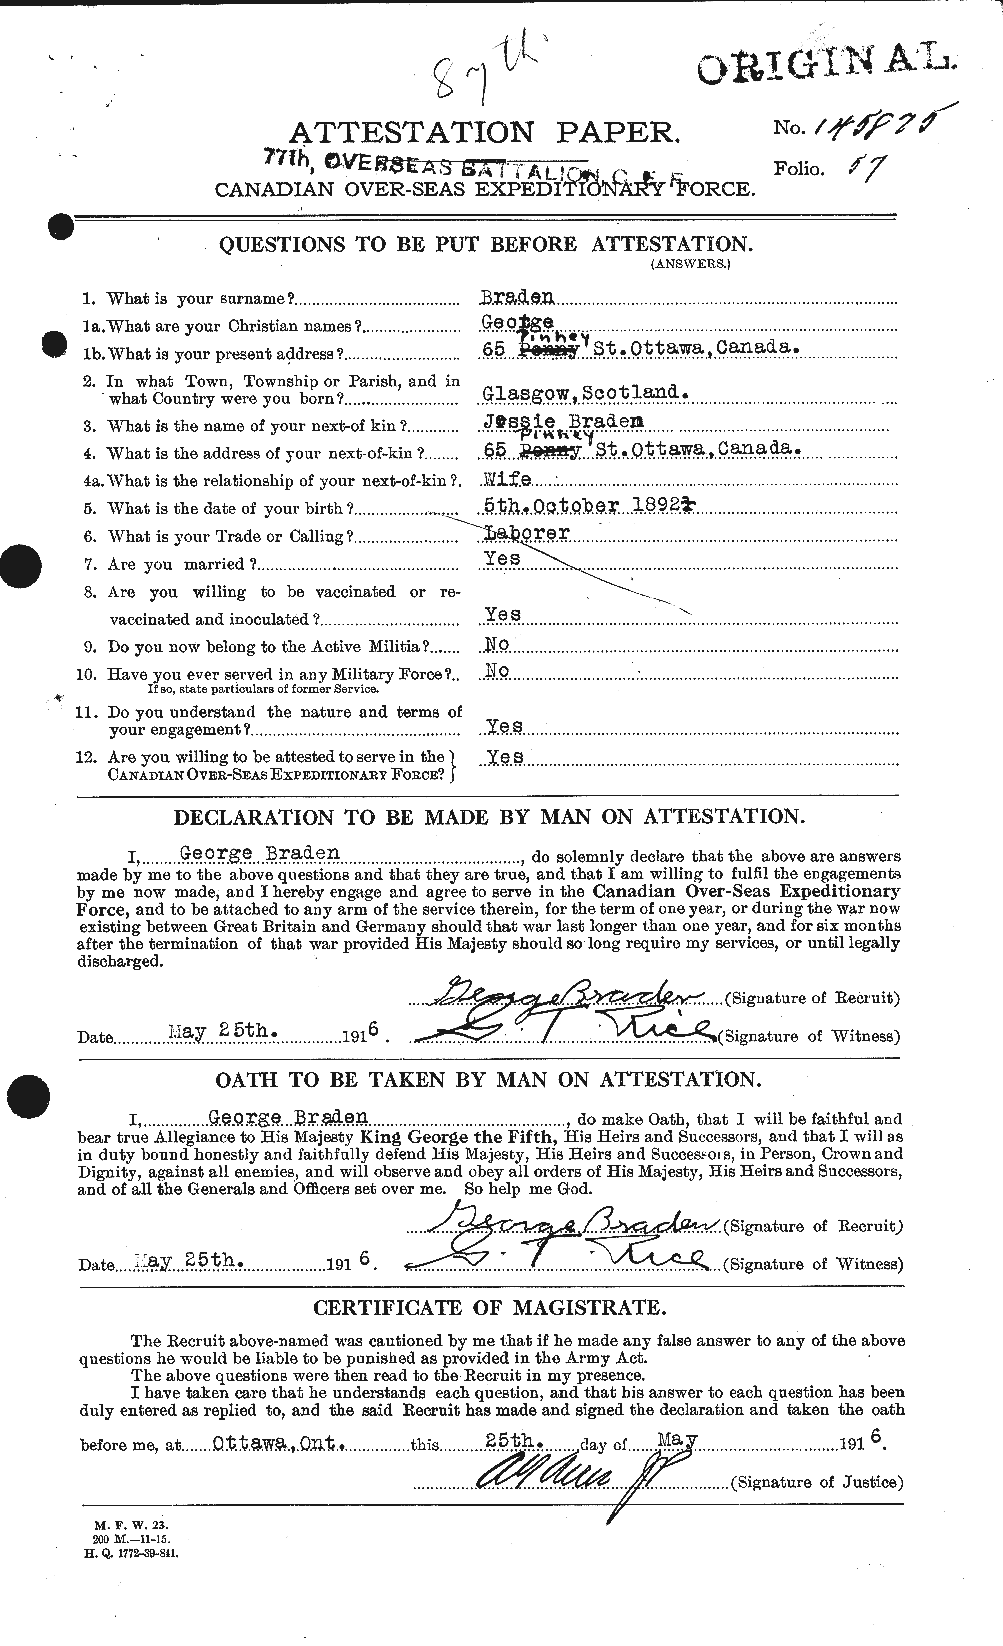 Personnel Records of the First World War - CEF 258576a